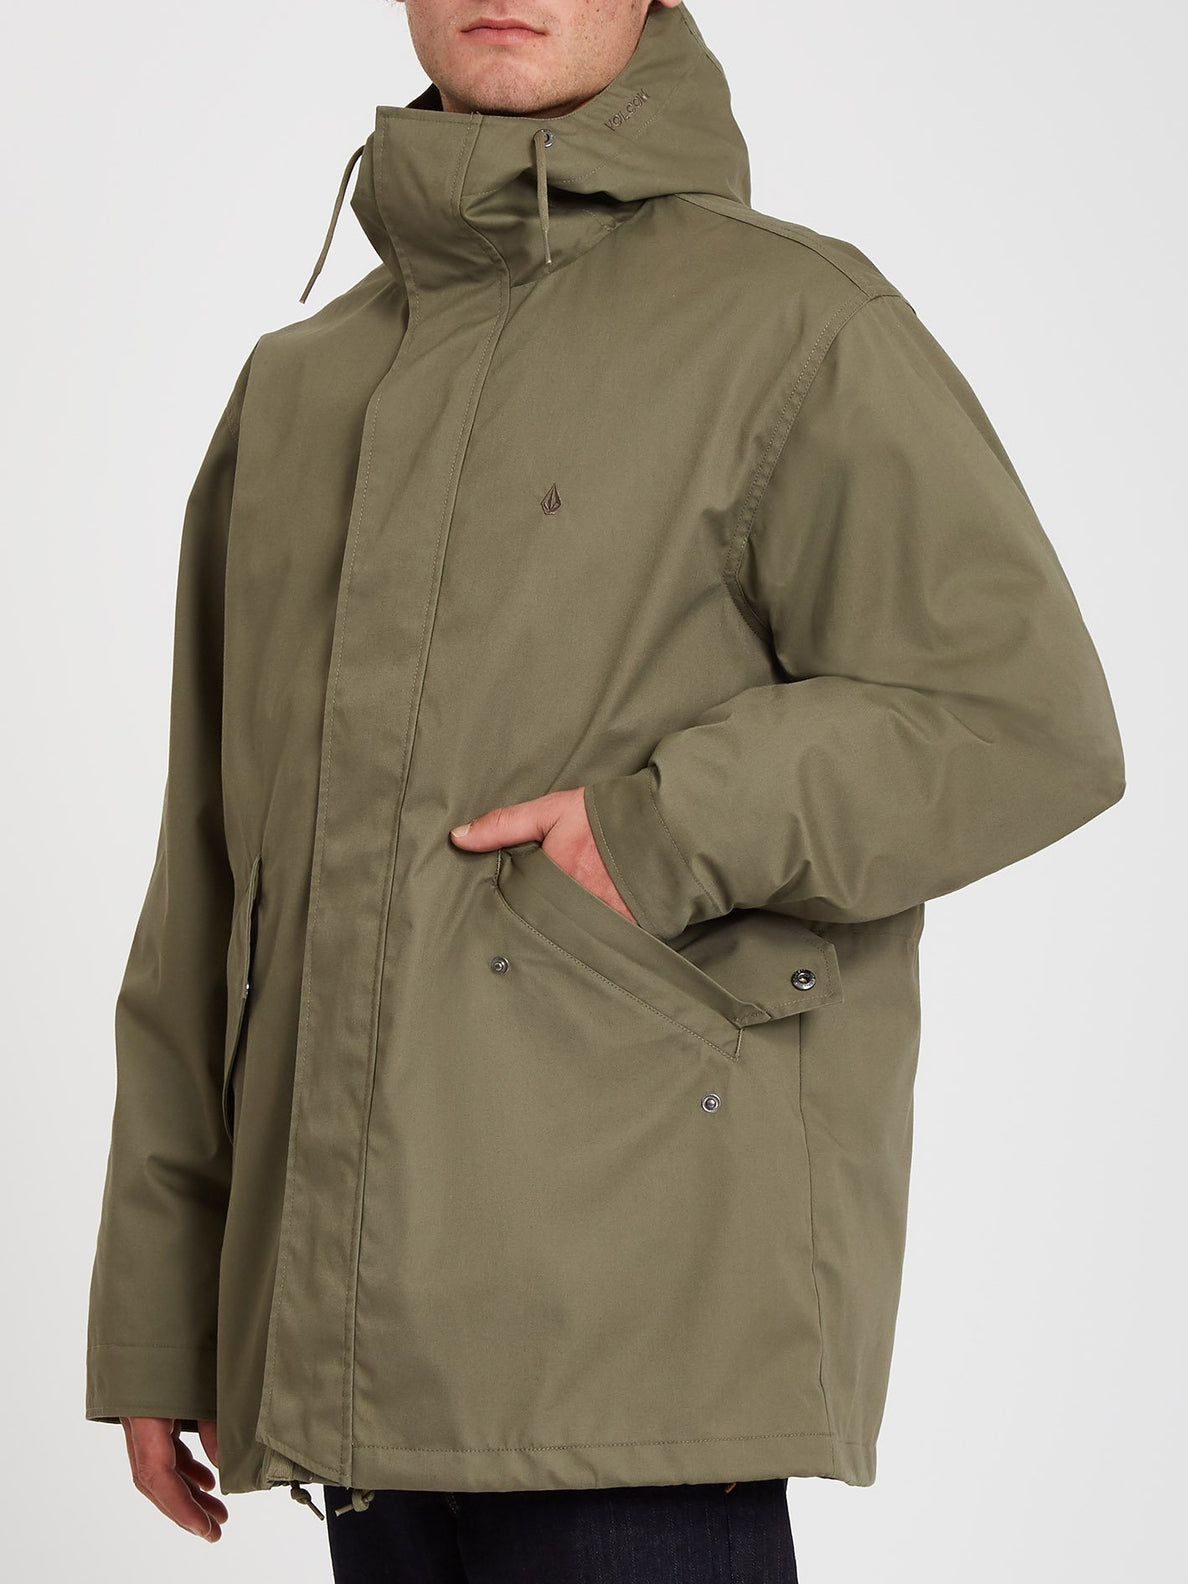 Shadowplay 5K 3In1 Jacket - ARMY GREEN COMBO (A1732106_ARC) [5]